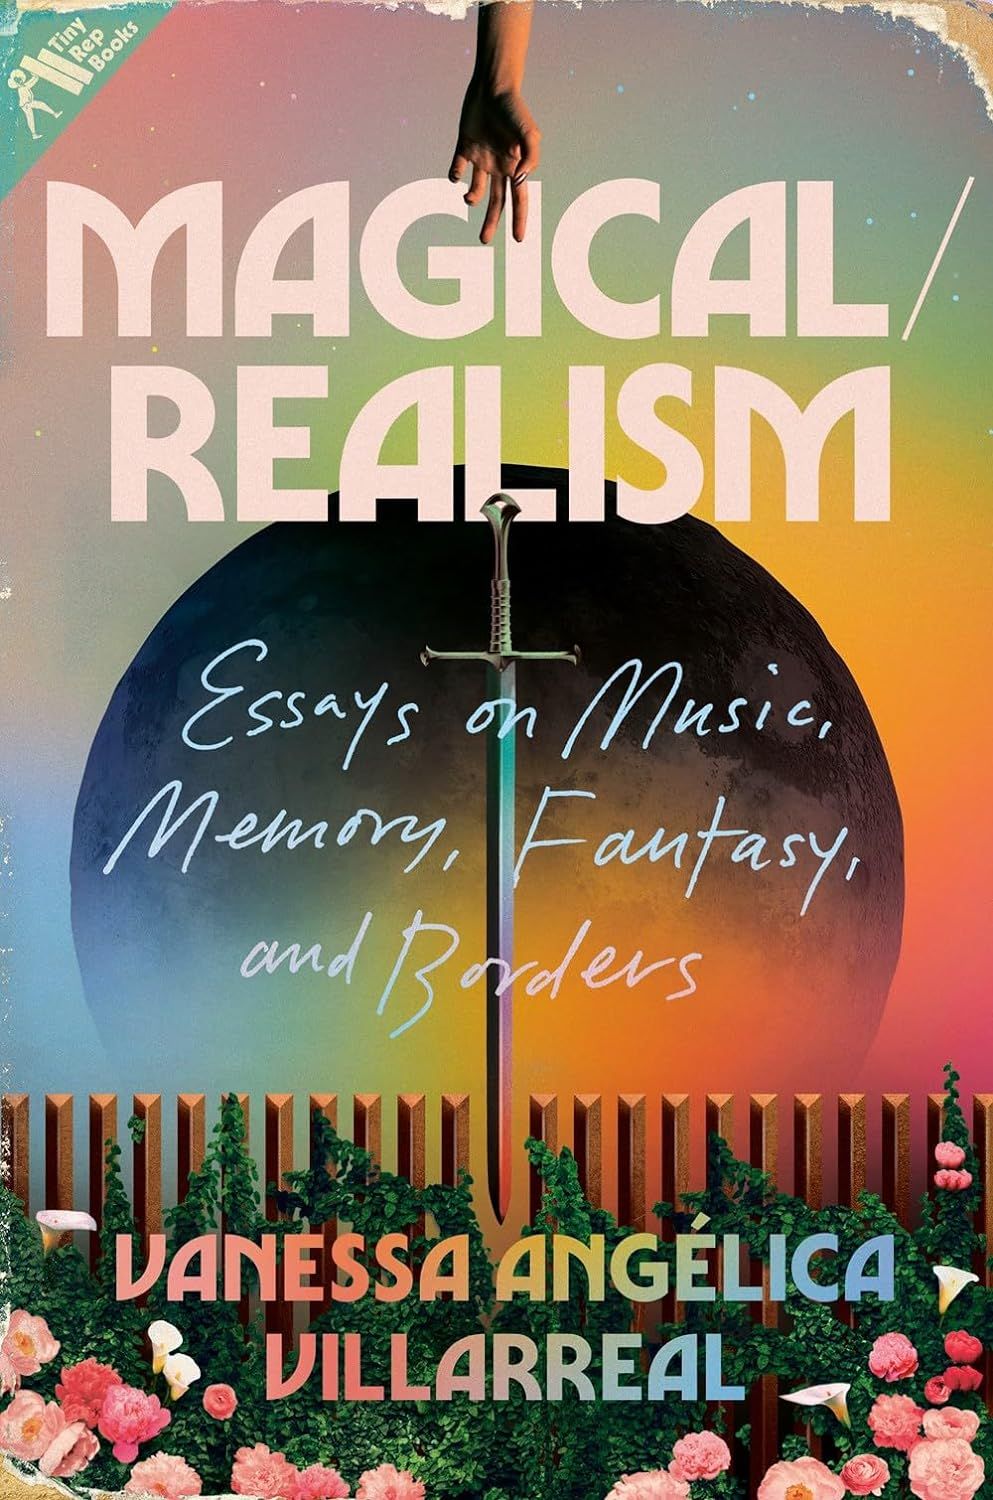 a graphic of the cover of Magical/Realism: Essays on Music, Memory, Fantasy, and Borders by Vanessa Angélica Villarreal 